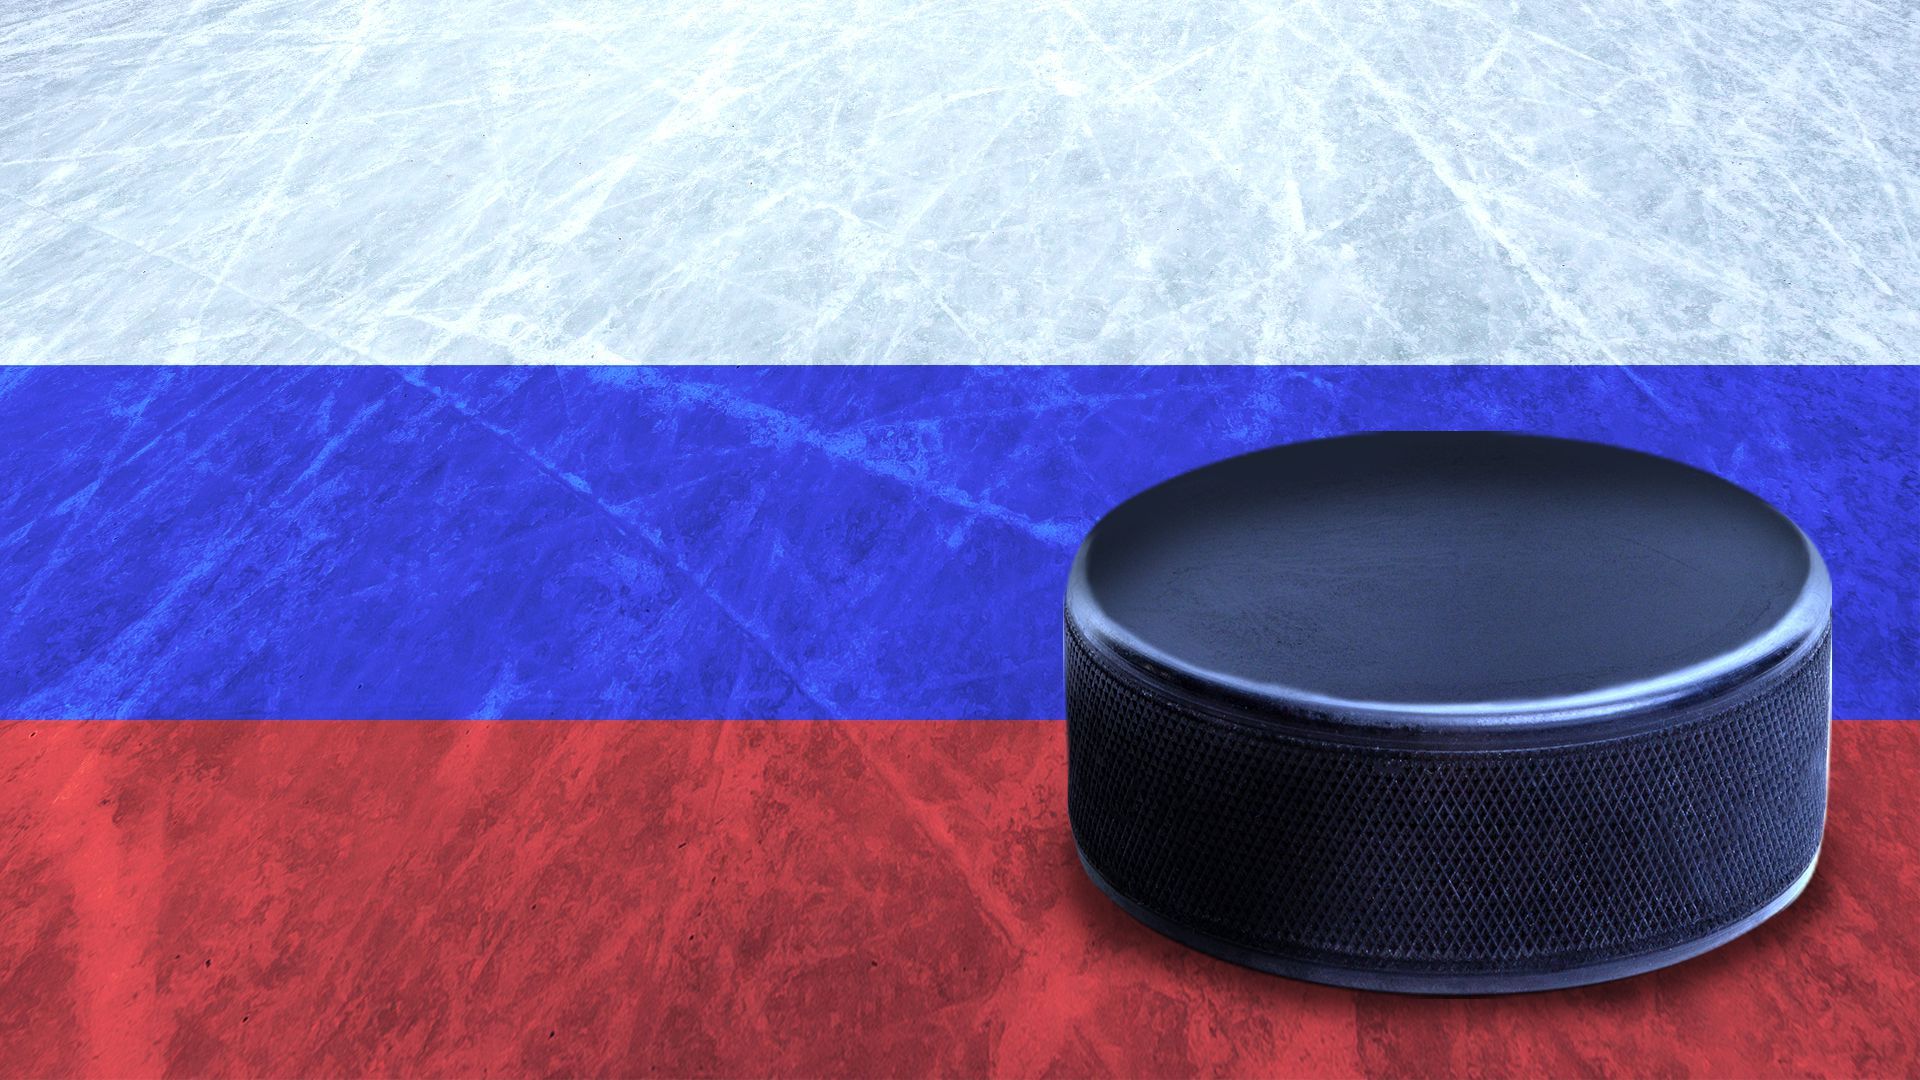  Illustration of a hockey puck on ice with the Russian flag